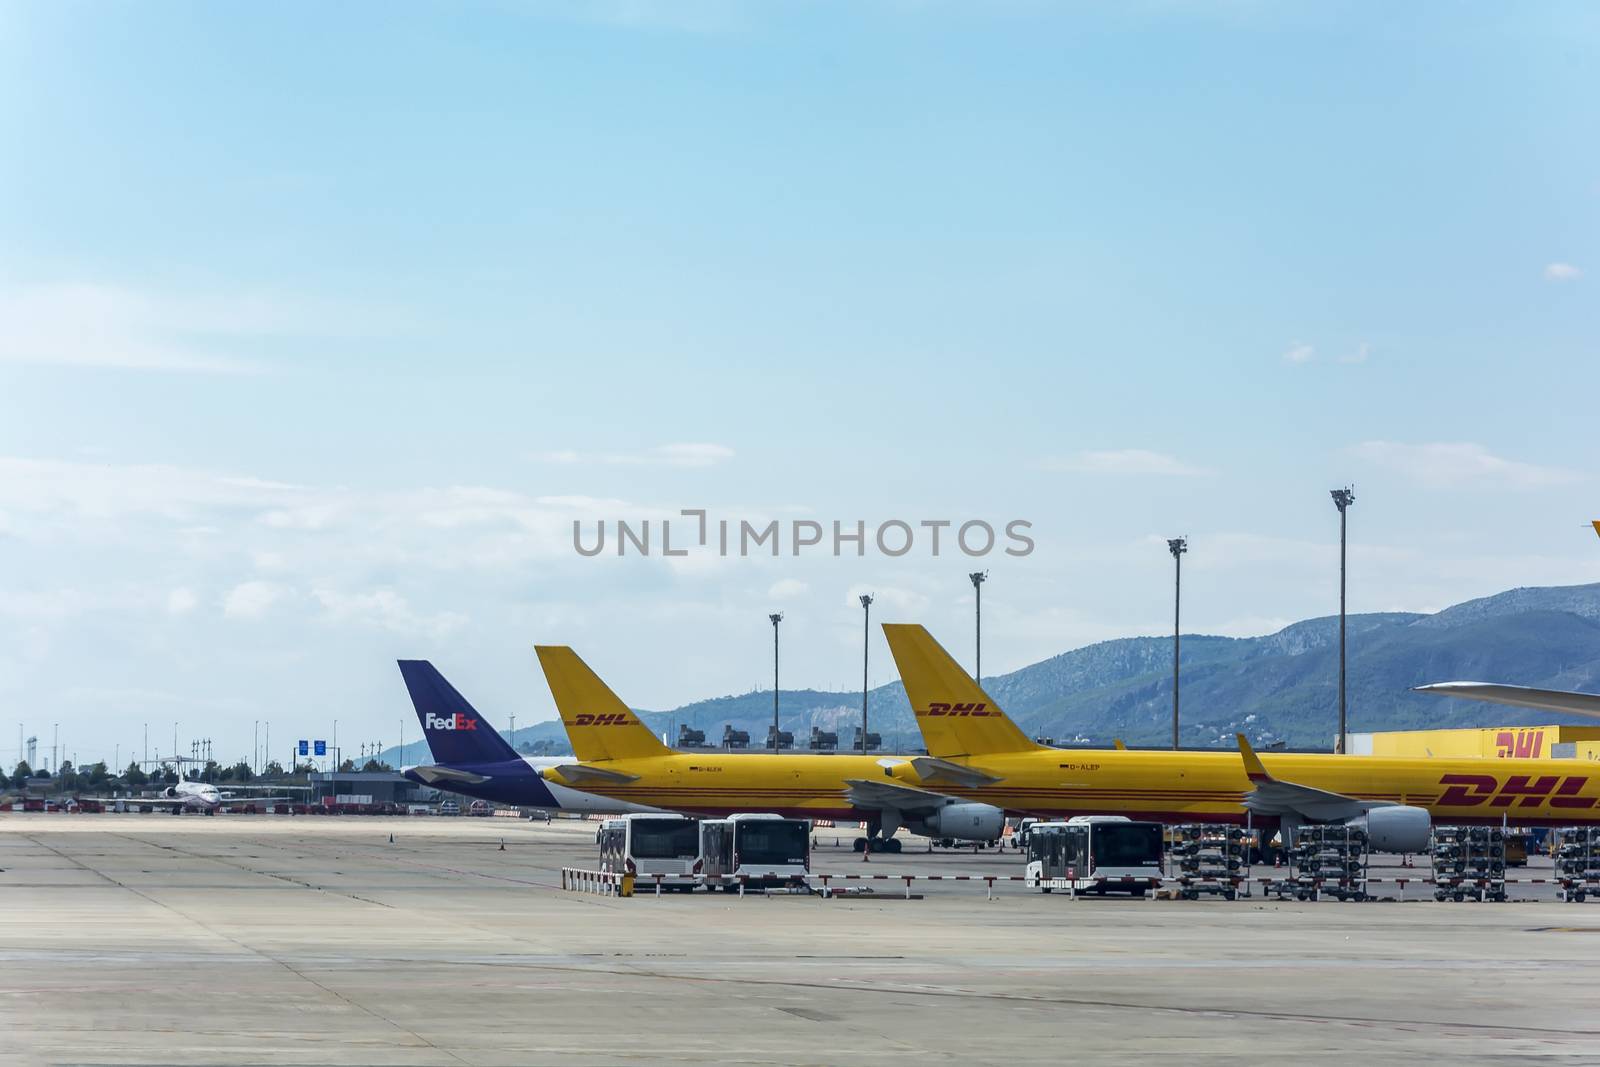 Spain, Barcelona - 26.09.2017: Aircraft of postal companies at the airport for parking and unloading